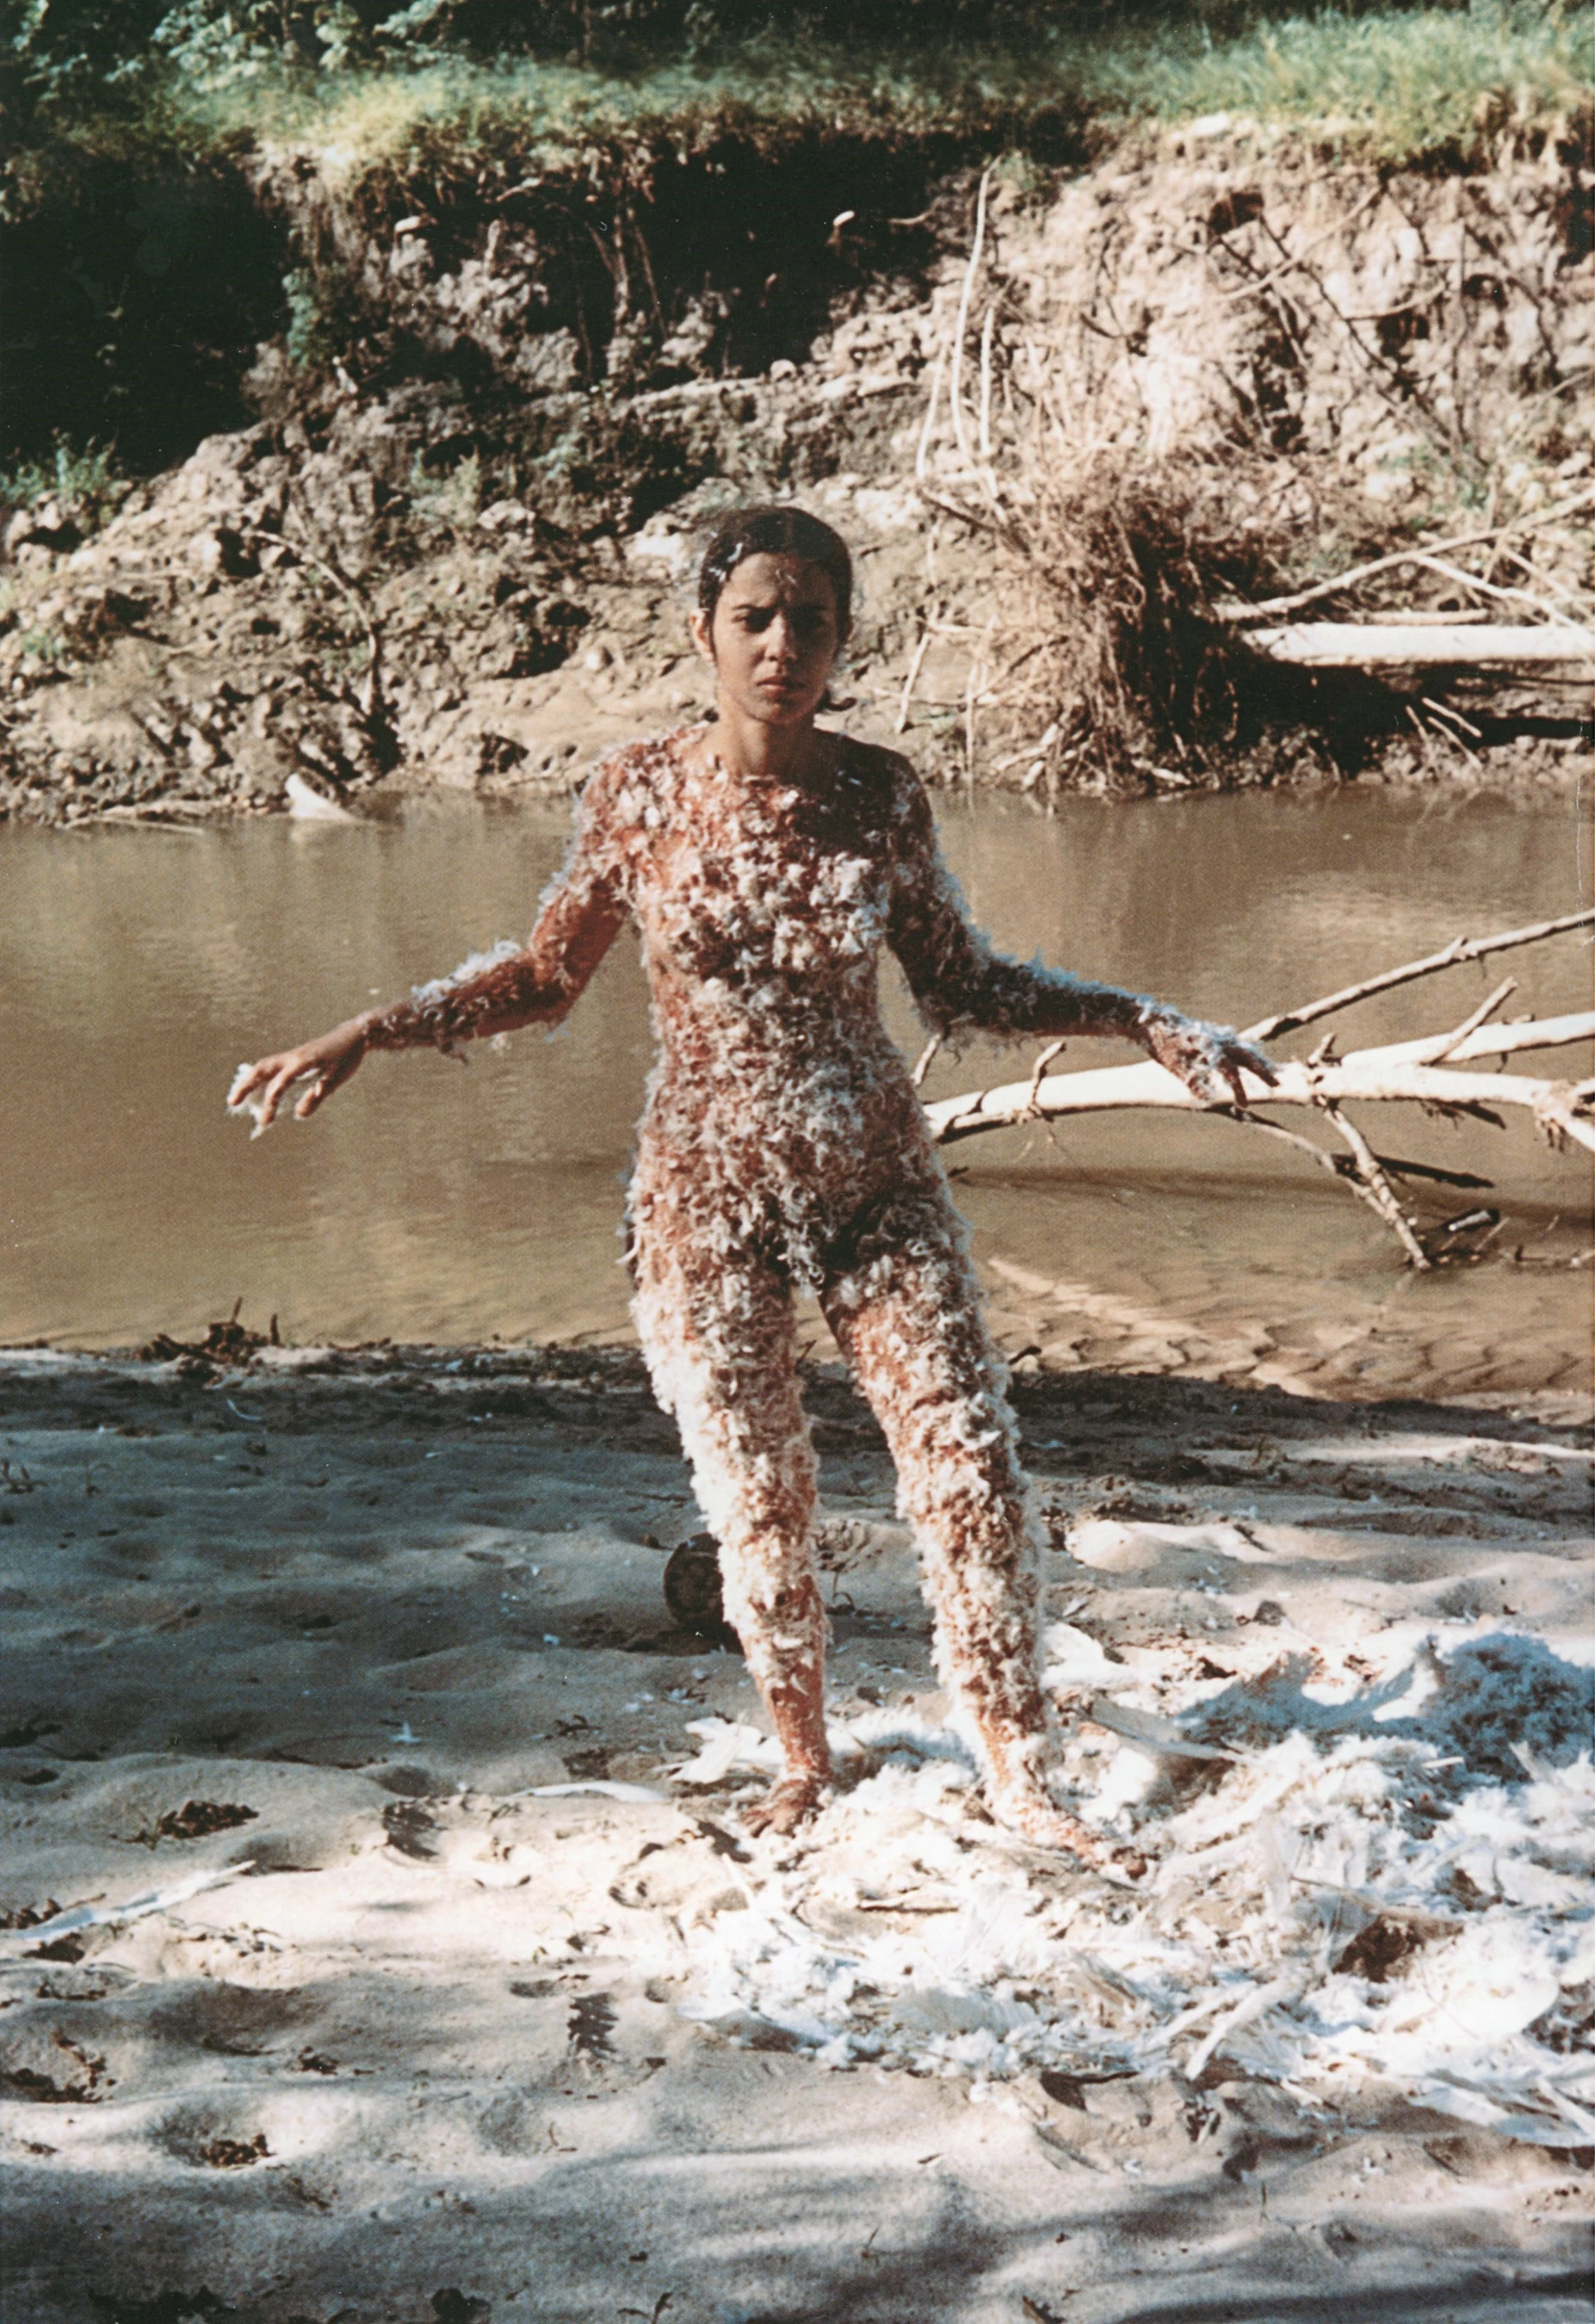 Still from Blood and Feathers #2, Ana Mendieta